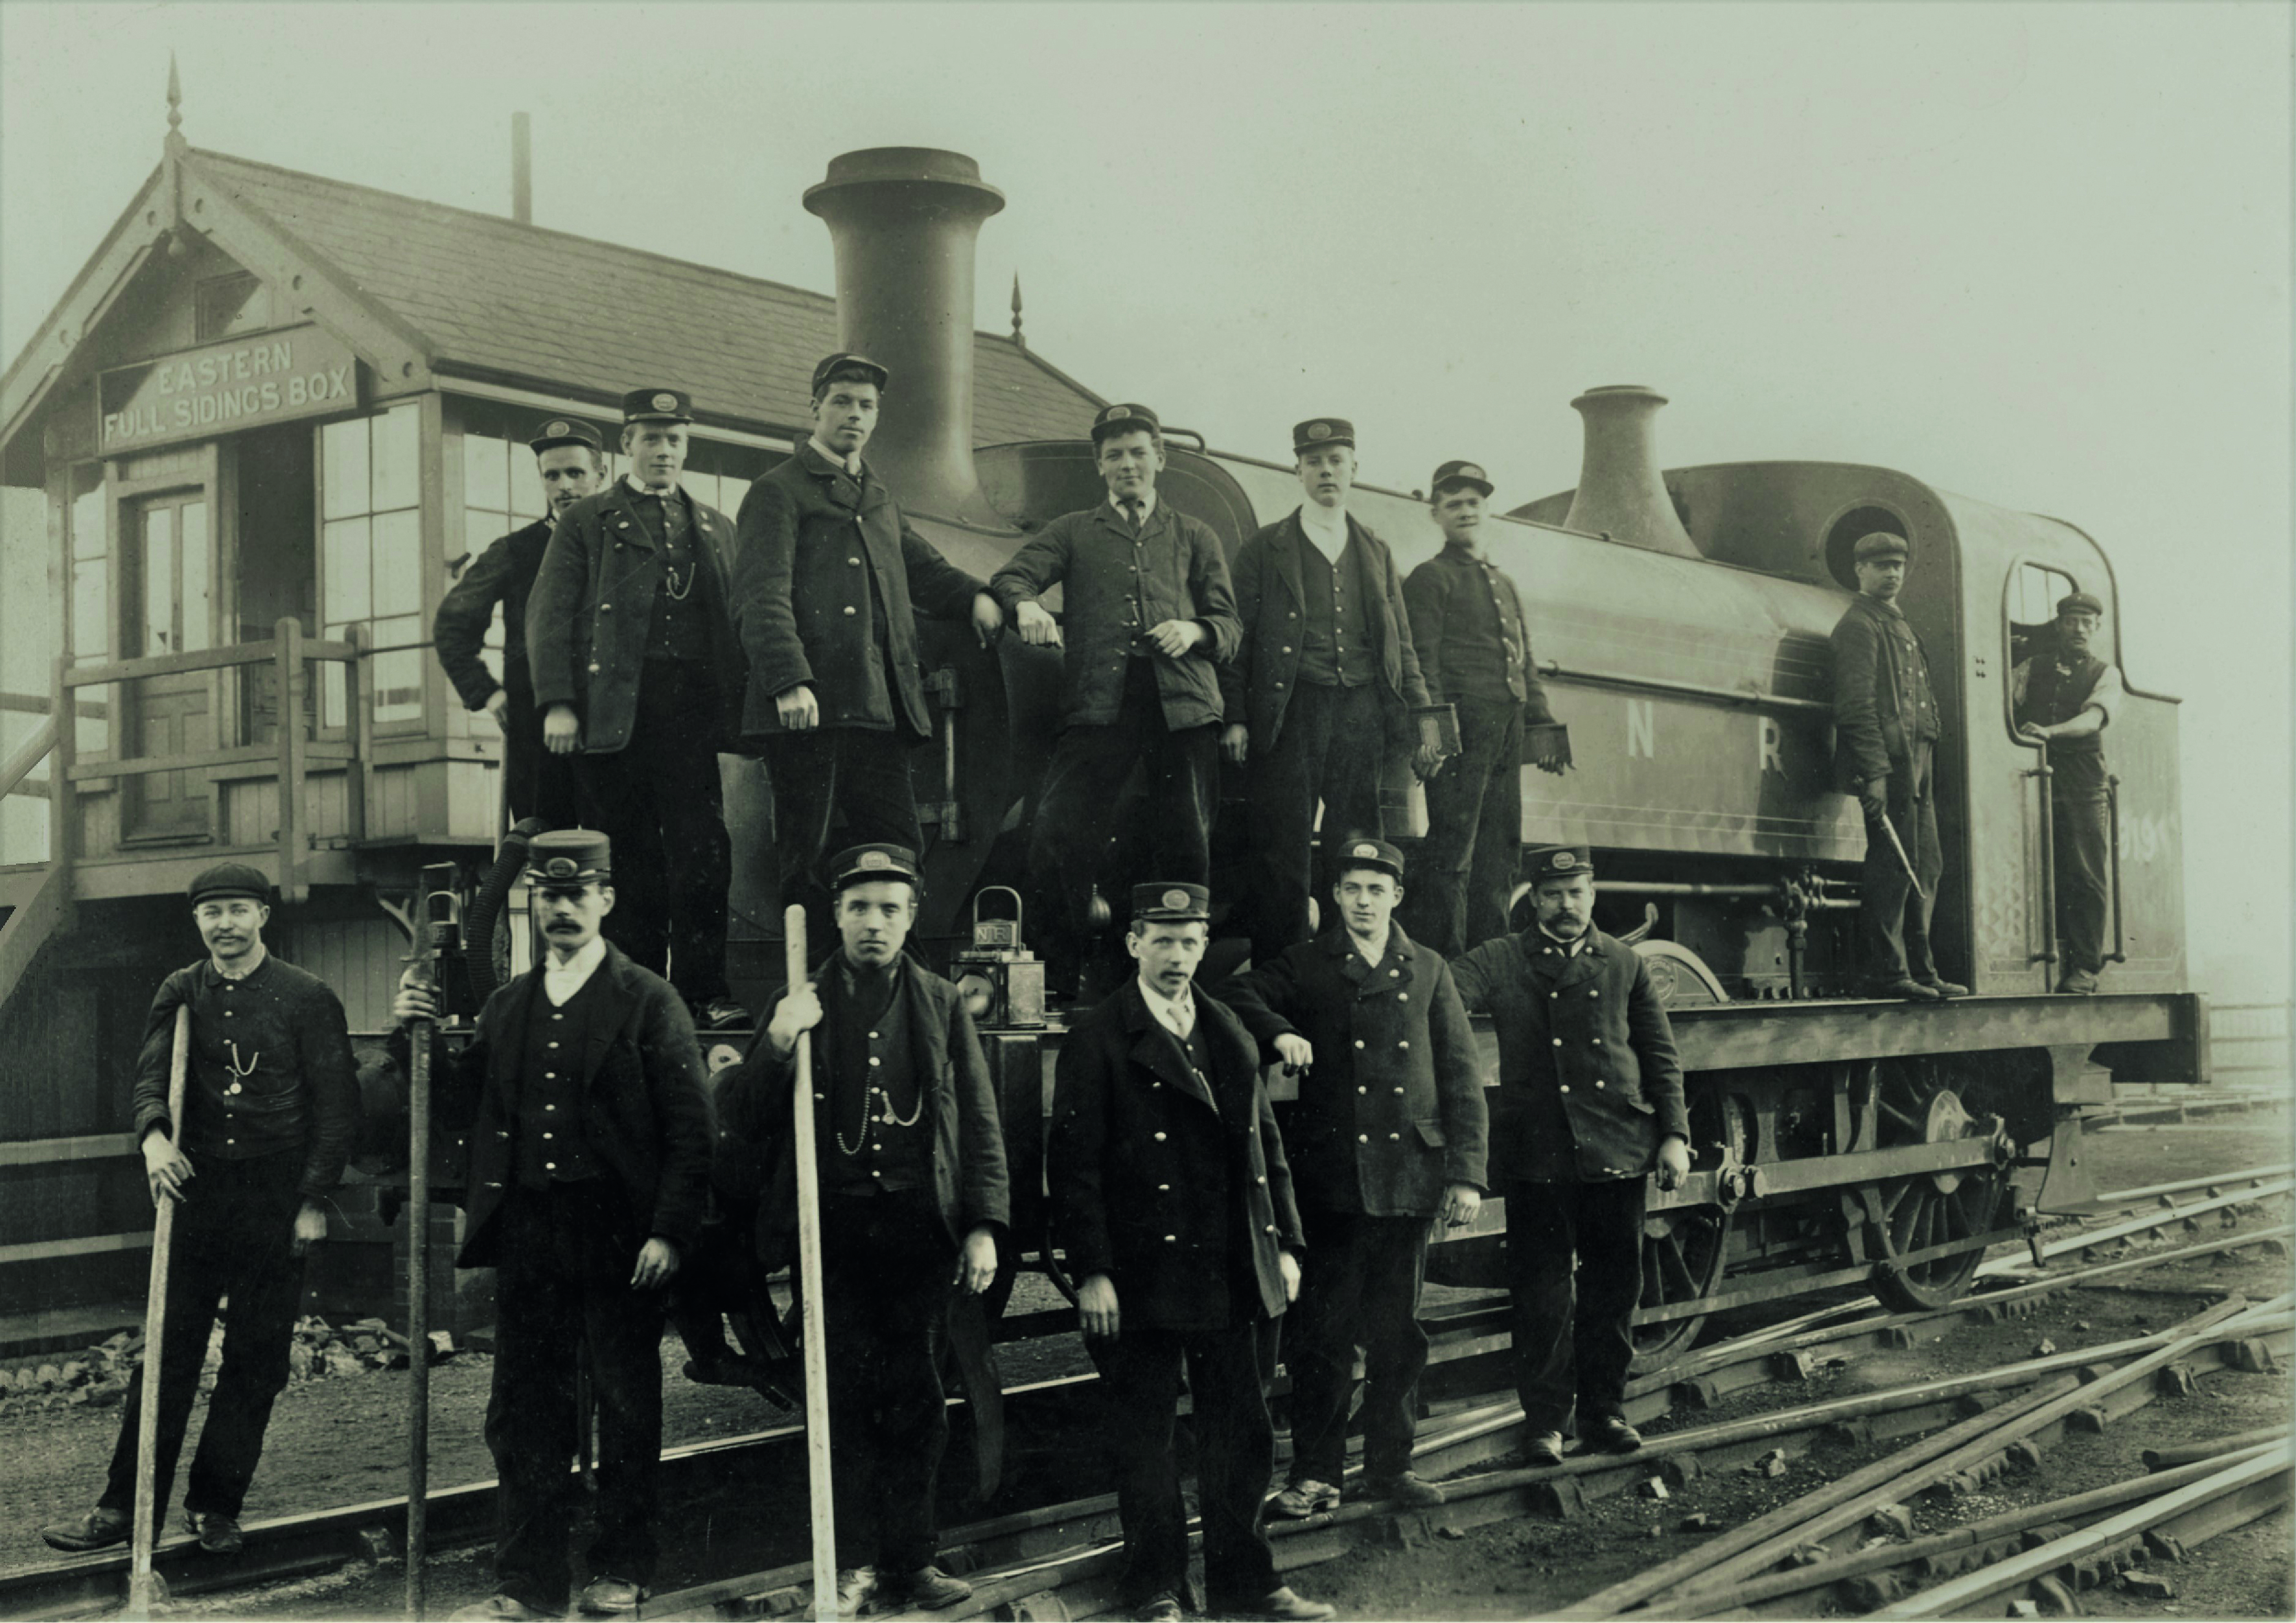 Old photo of men stood next to a loco train